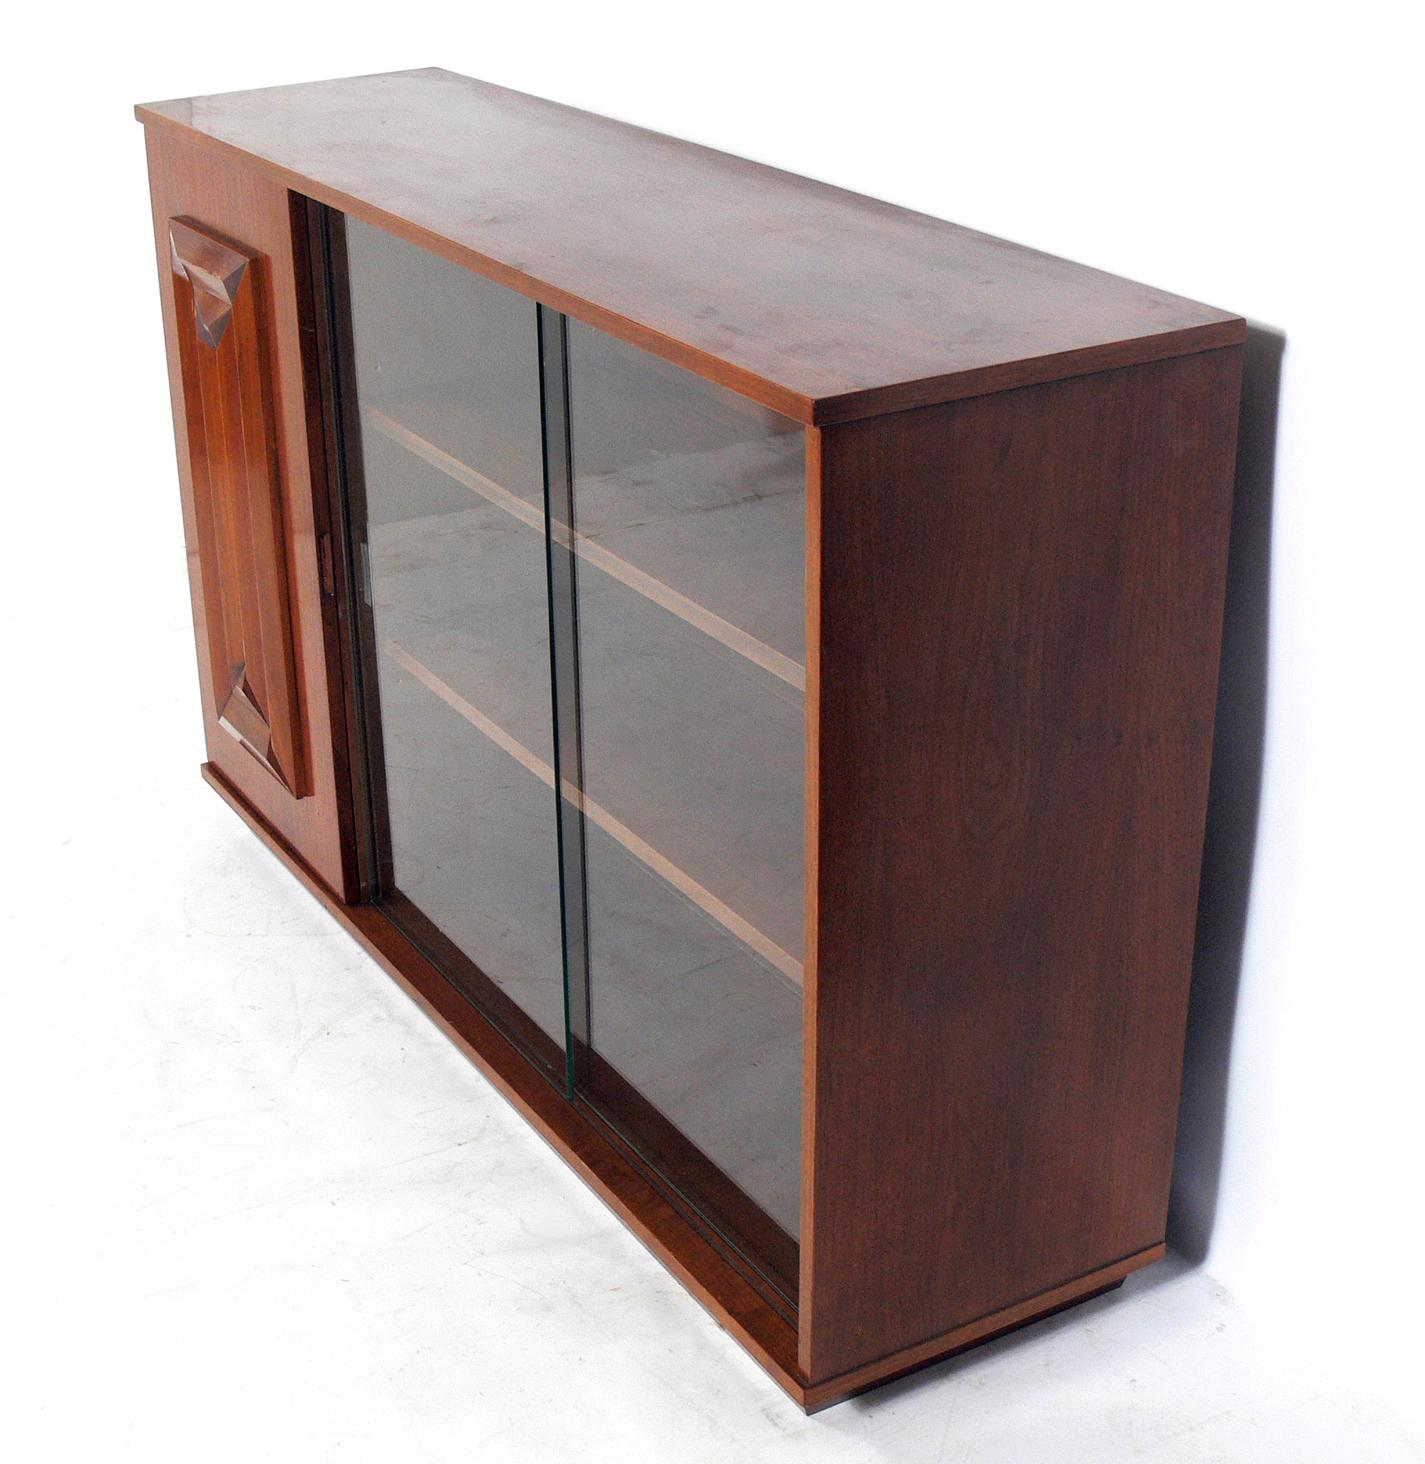 Midcentury walnut credenza or display cabinet with a geometric carved door, design attributed to Edmund Spence, circa 1950s. This piece is currently being refinished and can be completed in your choice of finish color. The price noted below includes